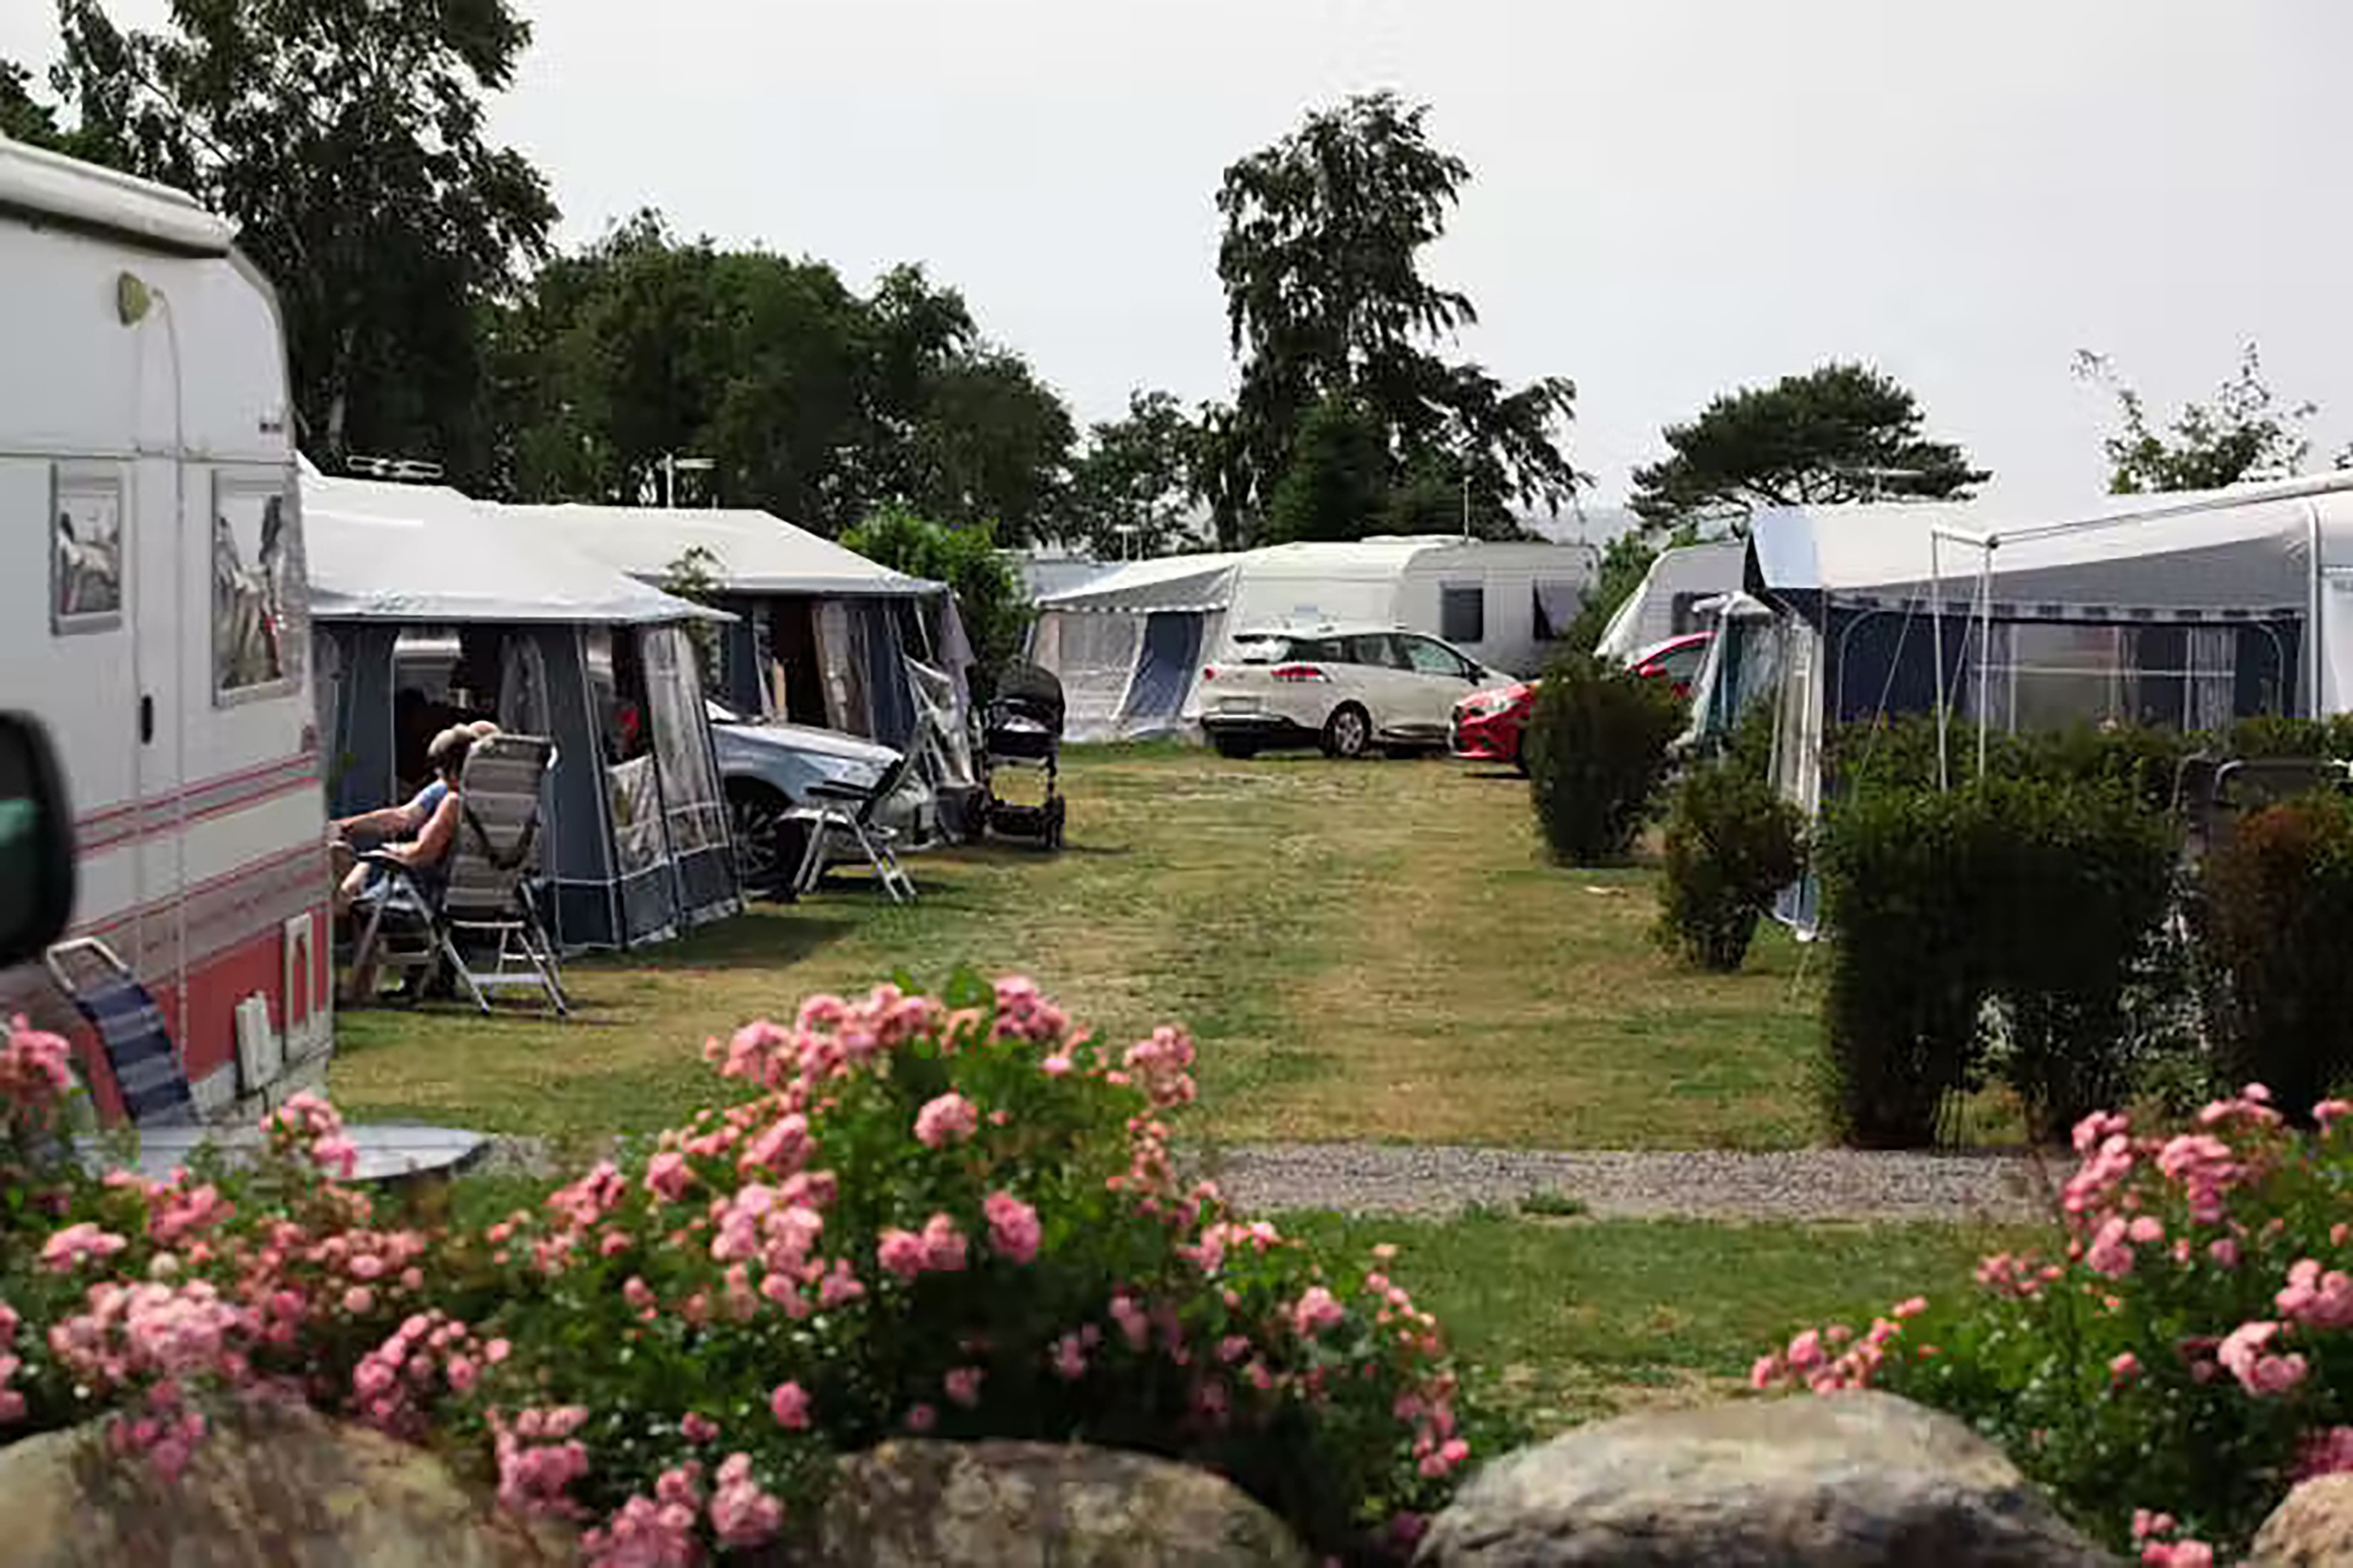 The campsite is surrounded by nature and offers a picturesque setting for your holiday on Bornholm.